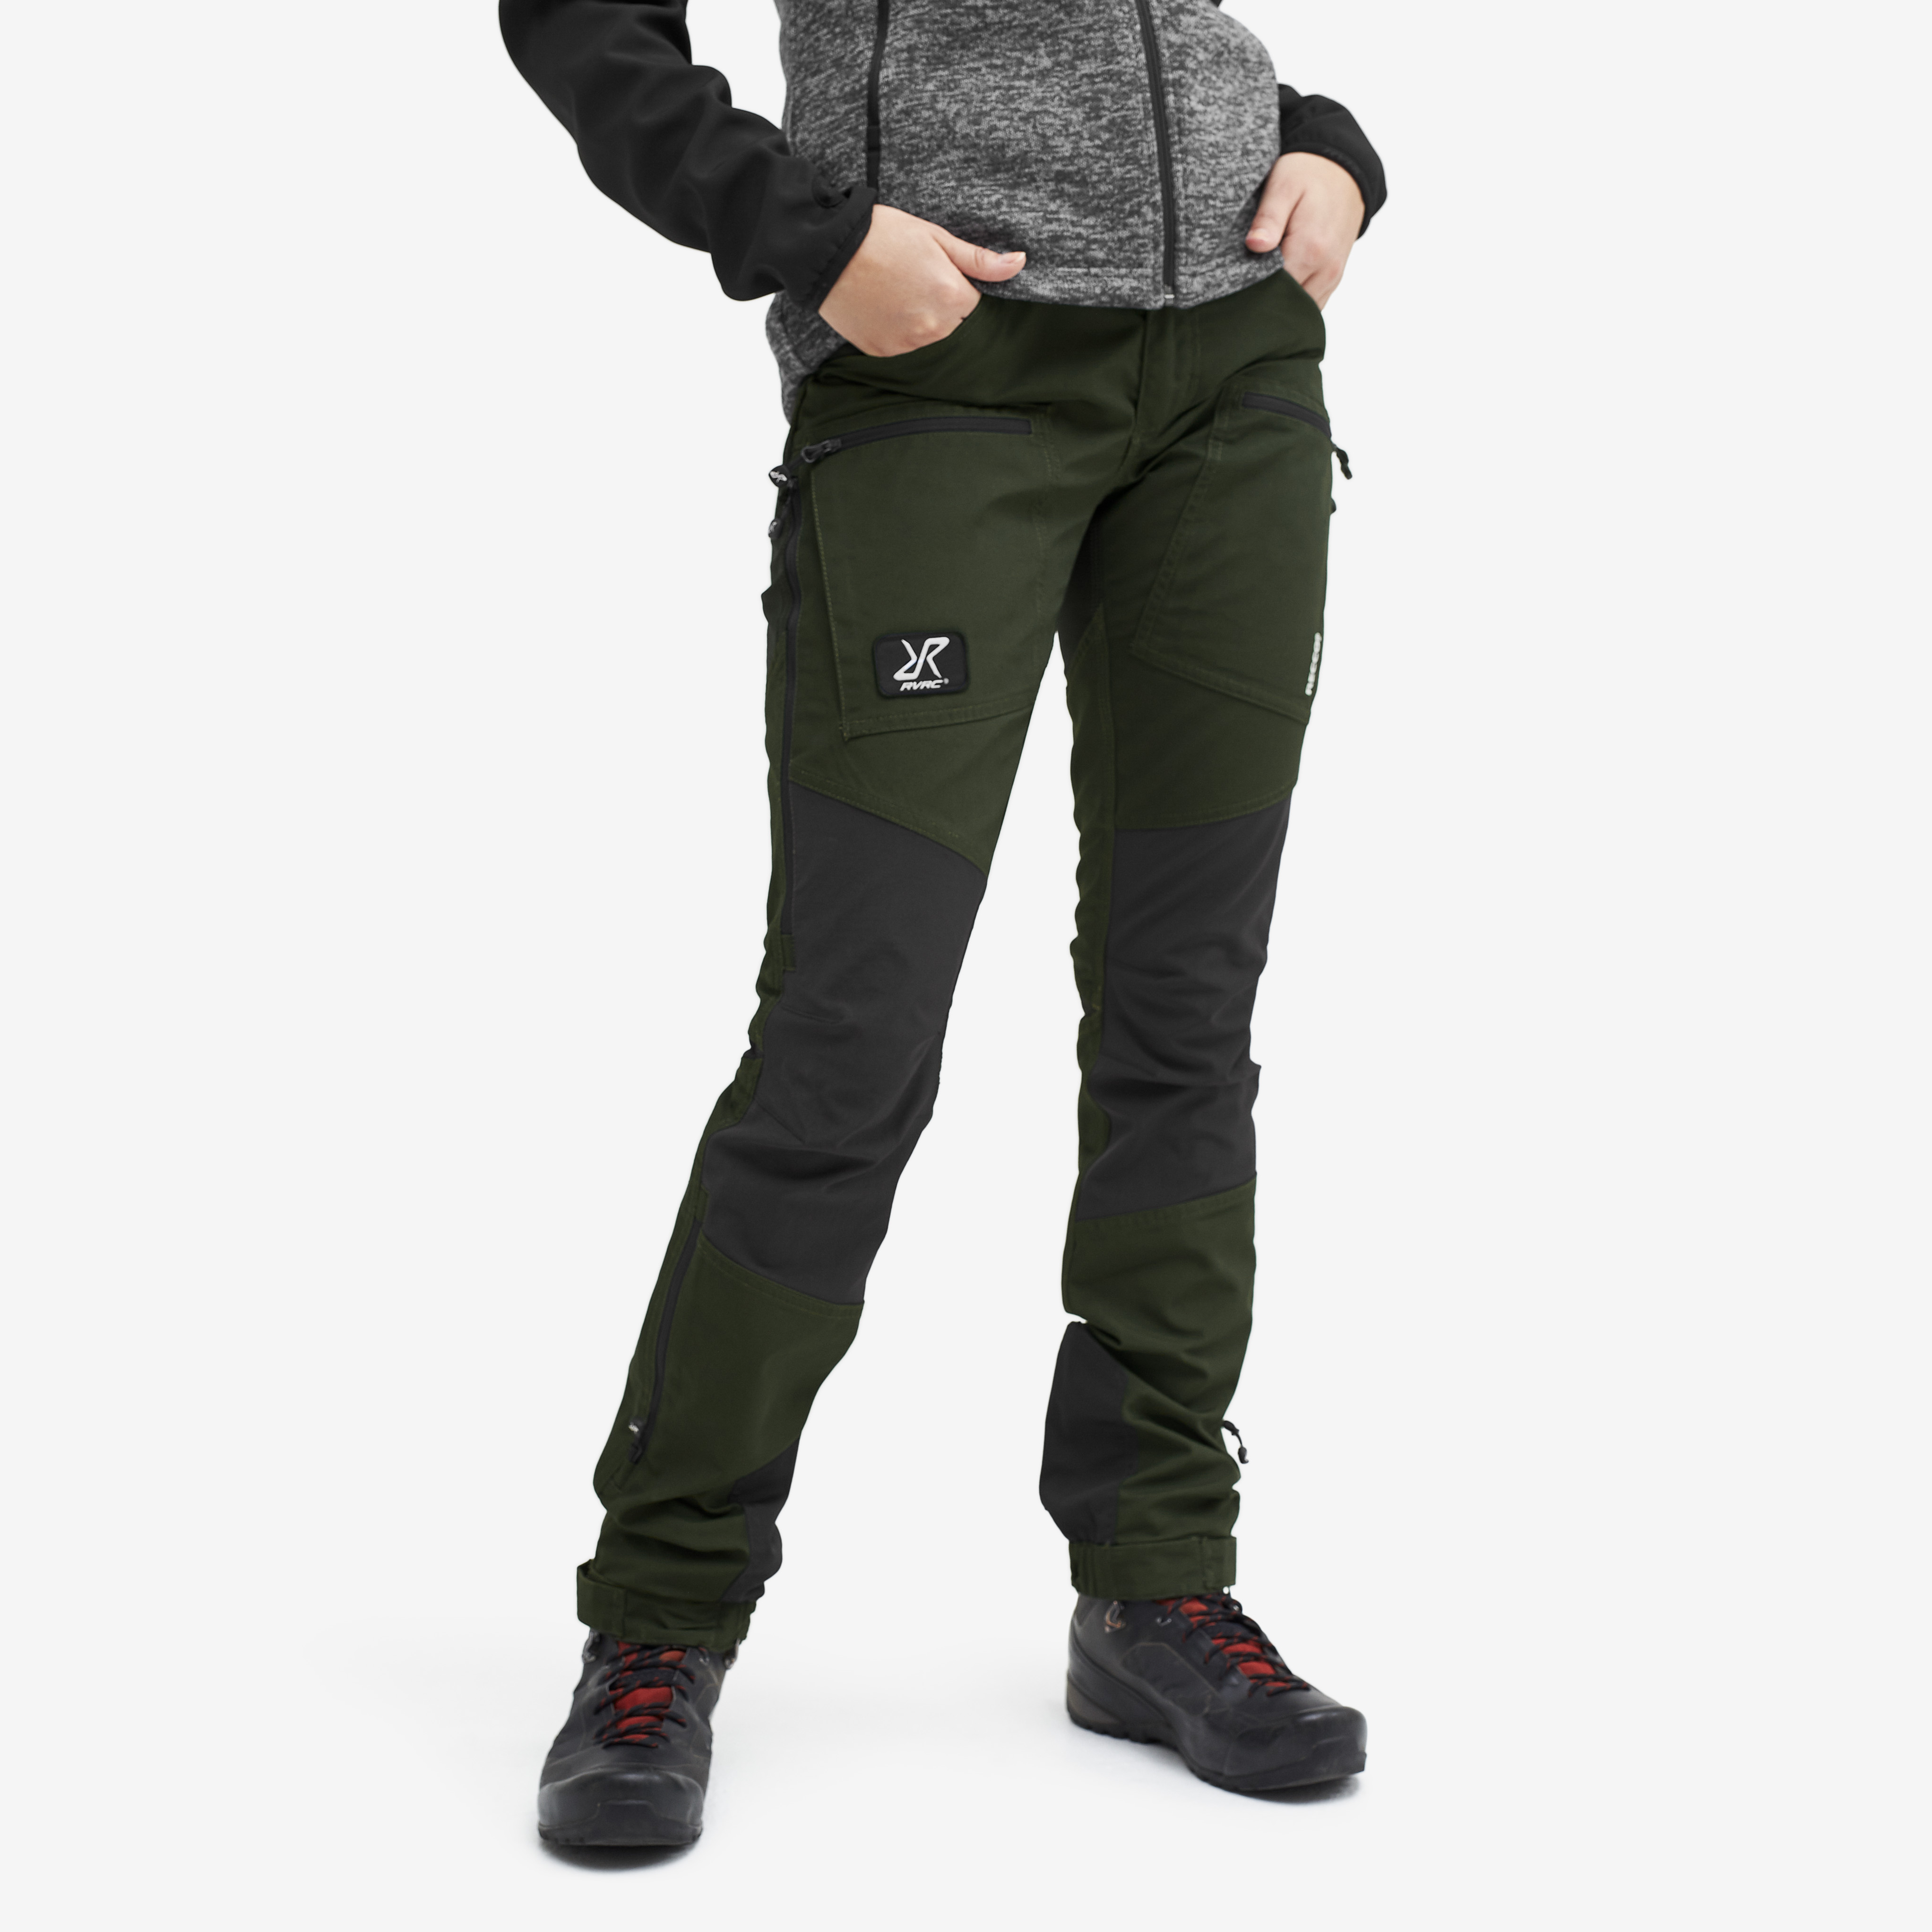 Nordwand Pro Rescue hiking pants for women in green